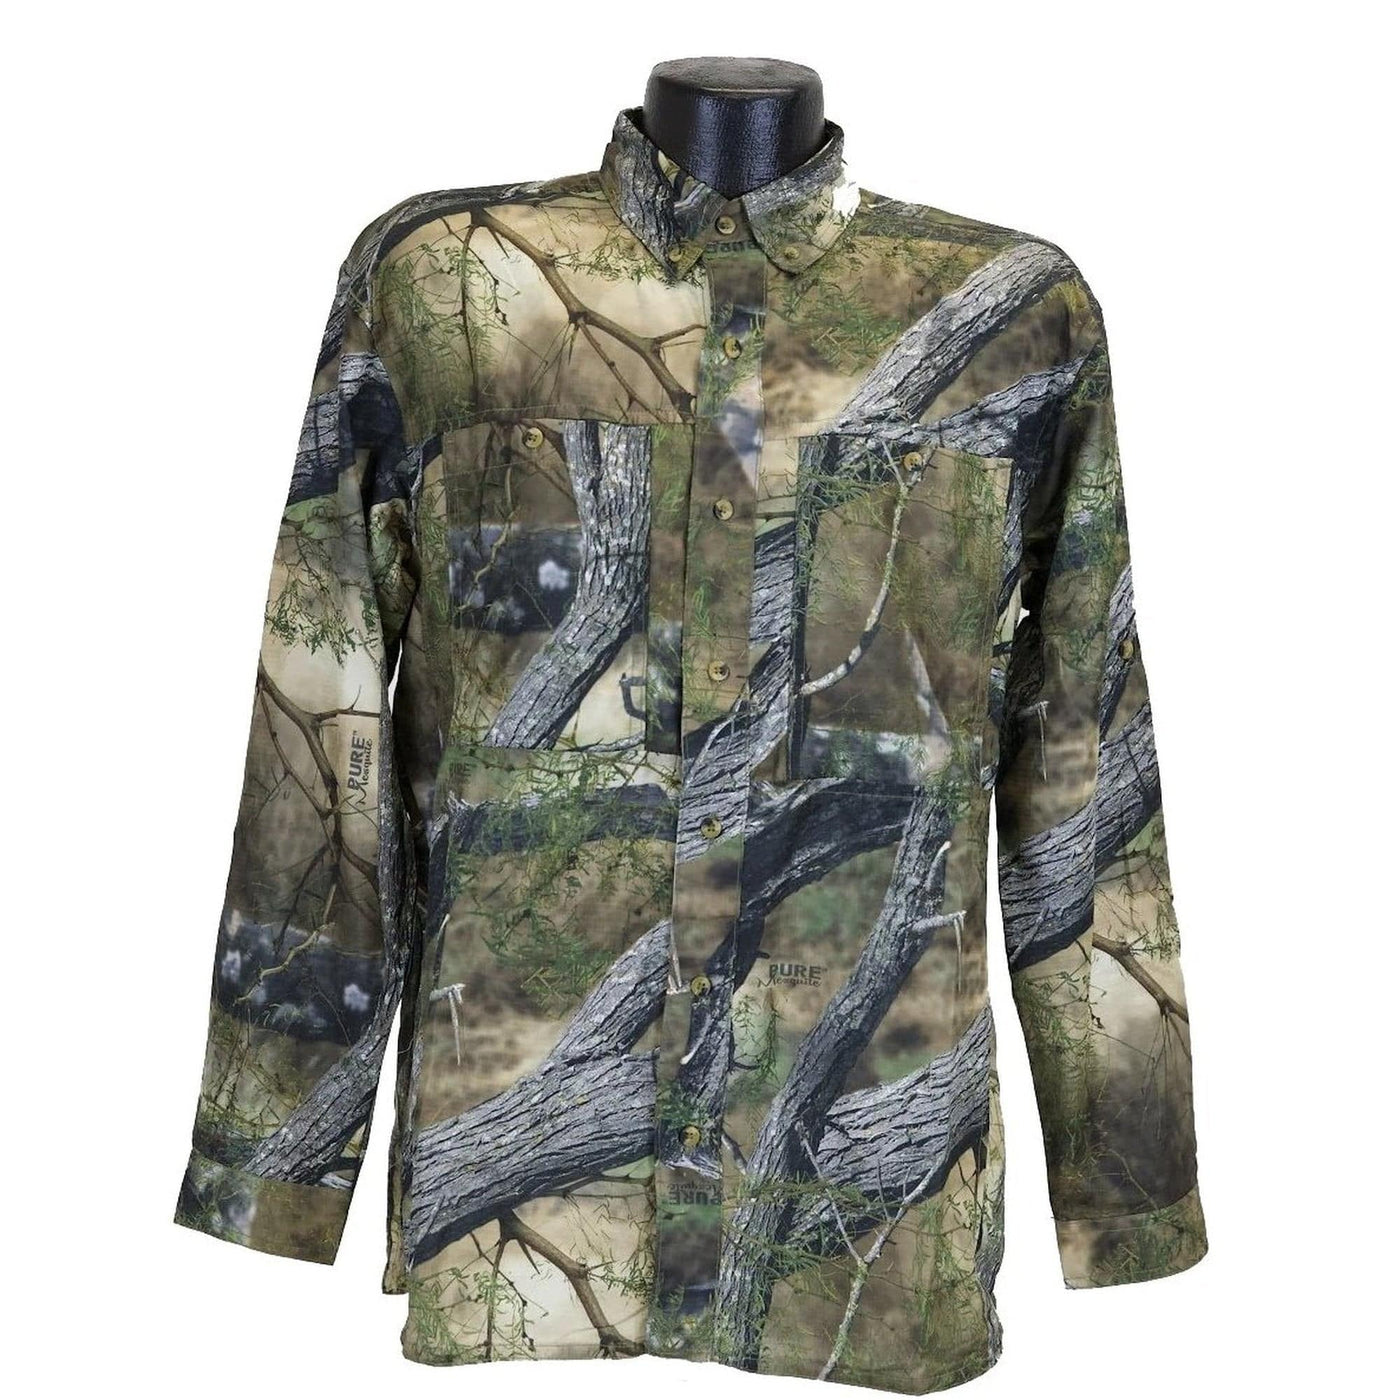 Pure Mesquite Gamehide Super-Light Camo Hunt Shirt - Long Sleeve Small Other